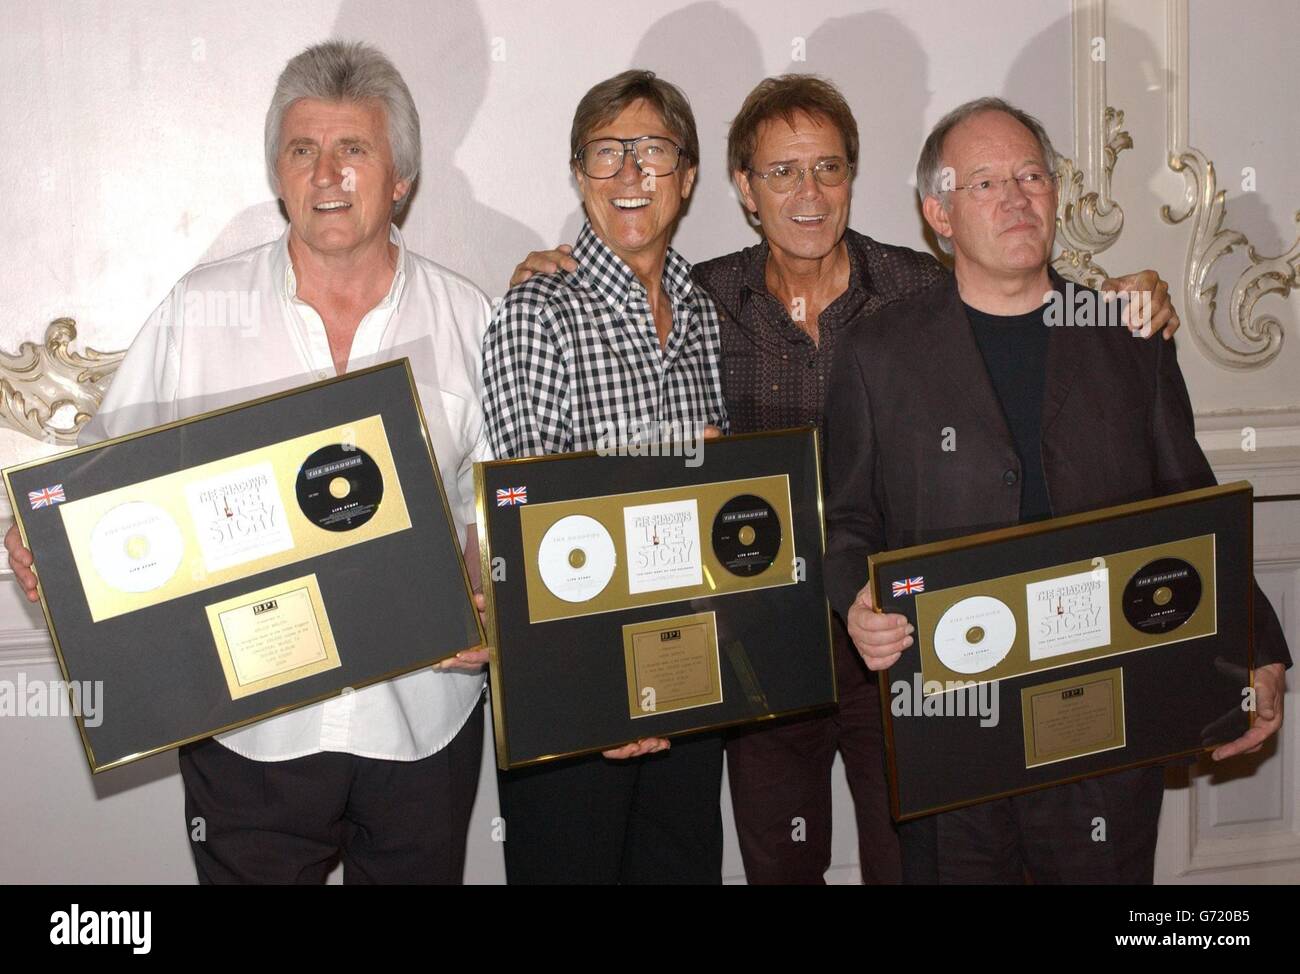 Sir Cliff Richard (second right) with the Shadows, (from left) Bruce Welch, Hank B Marvin and Brian Bennett at the London Palladium, ahead of their final concert appearance together, which will see Sir Cliff sing three numbers. Band members Marvin, Bruce Welch and Brian Bennett have been touring the UK for the last time in their 45-year career, playing 37 sellout dates before their last ever performance. The group are holding gold discs to mark more than 100,000 sales of their recent double CD Life Story - The Very Best Of The Shadows. Stock Photo